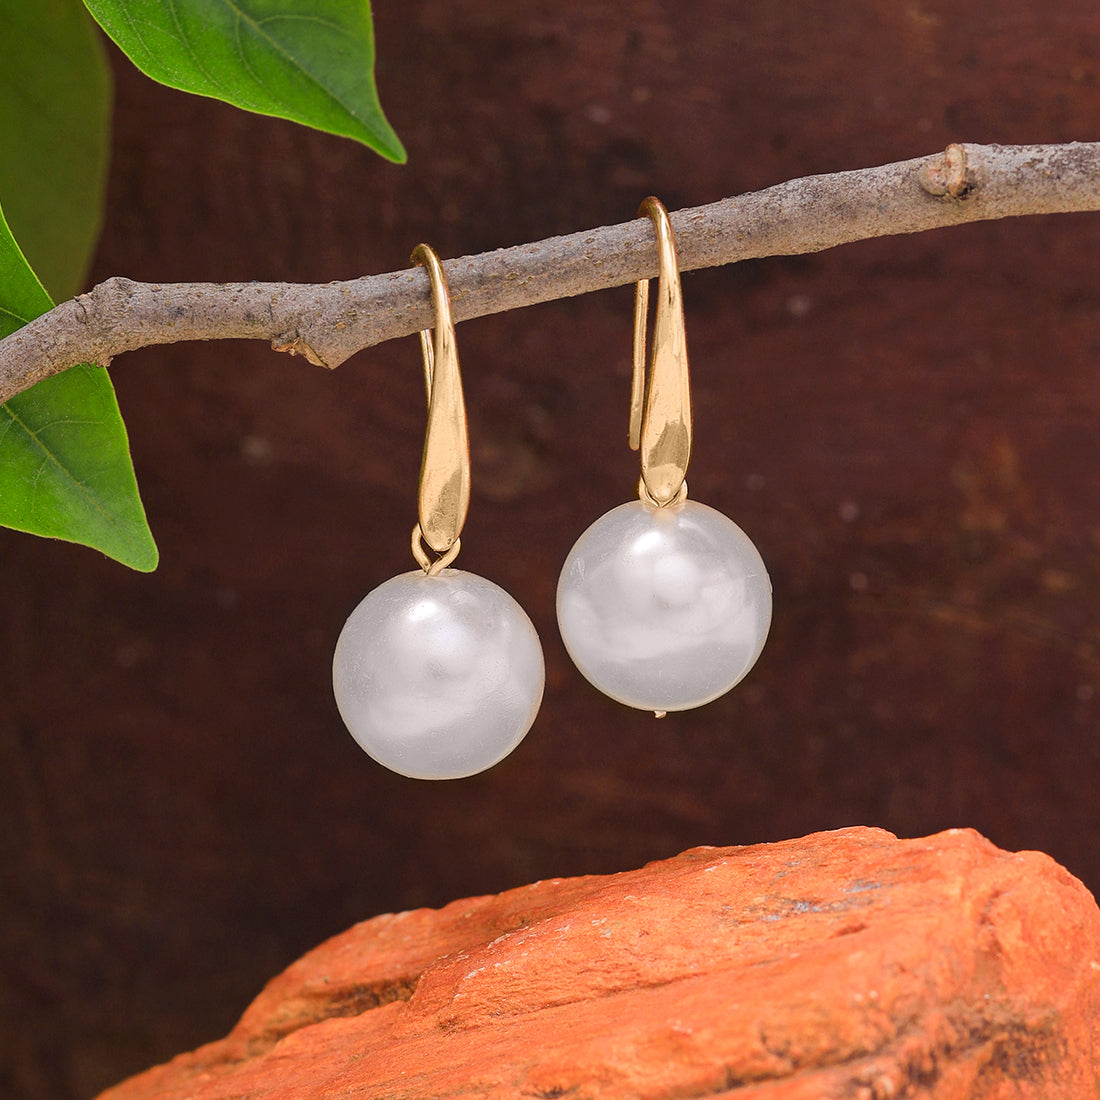 Minimalist Gold Earrings With A Prominent, Single Big Pearl.